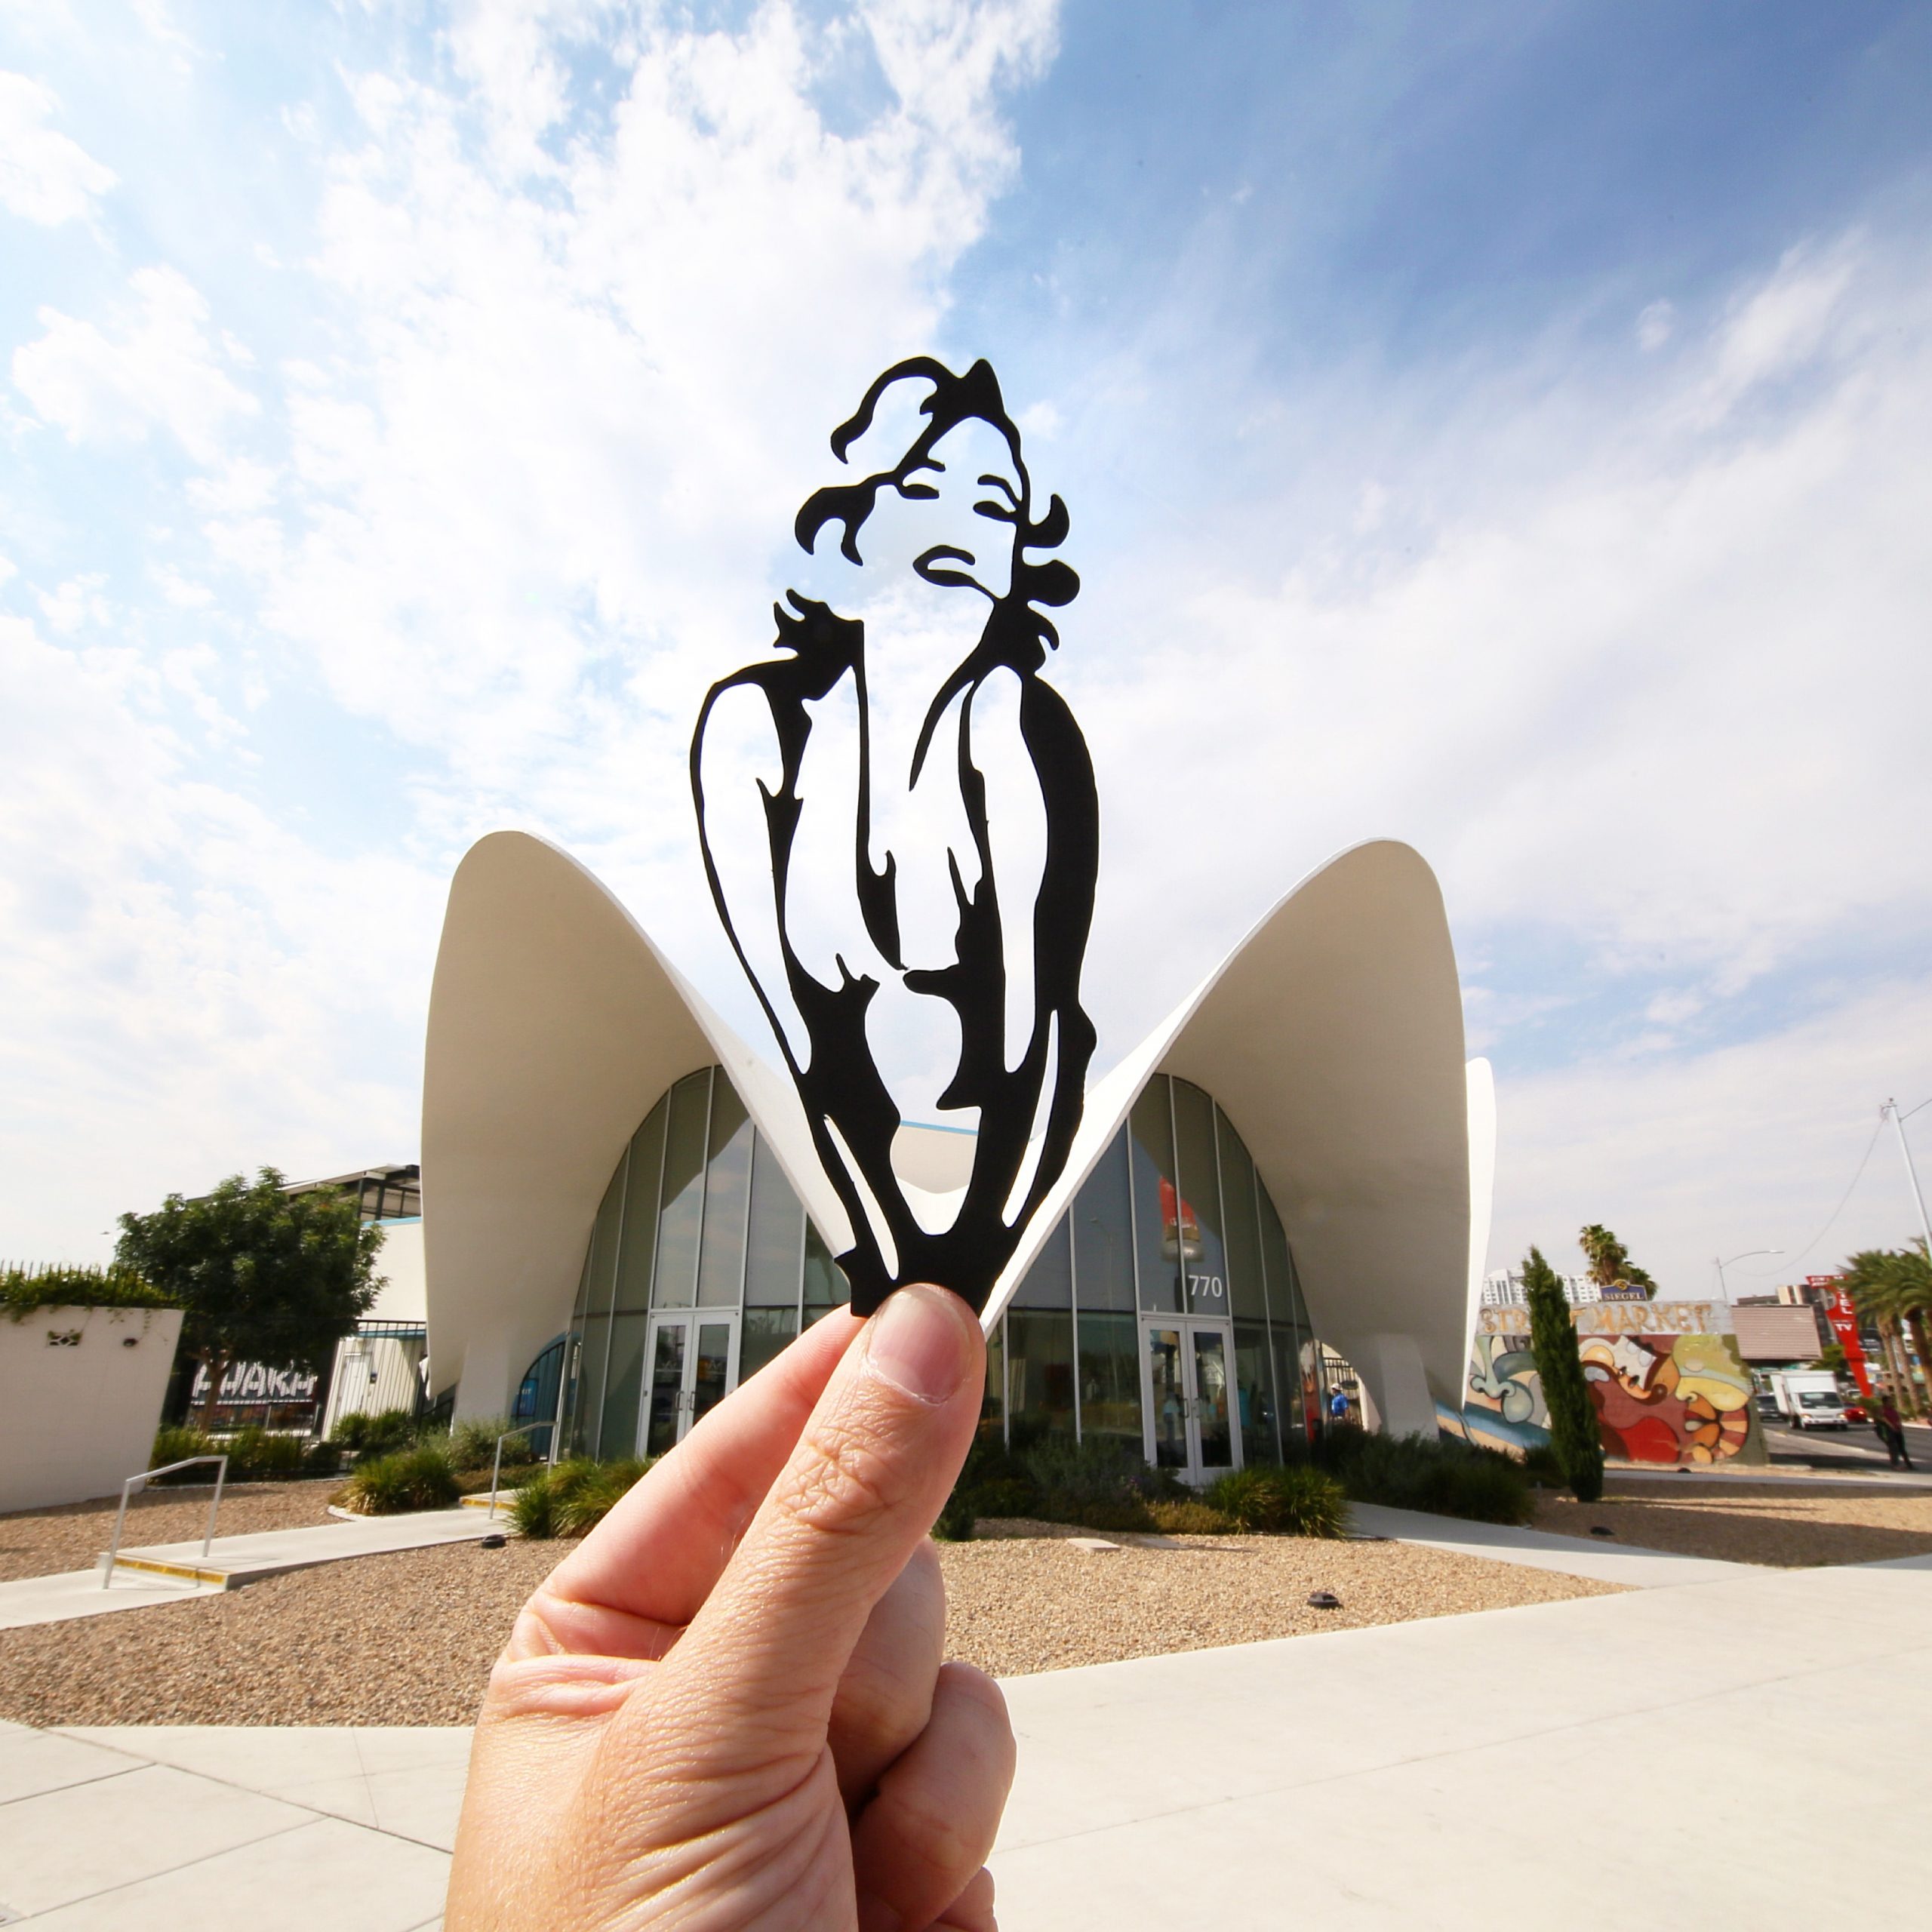 A piece of Paperboyo art featuring a card cut-out of Marilyn Monroe